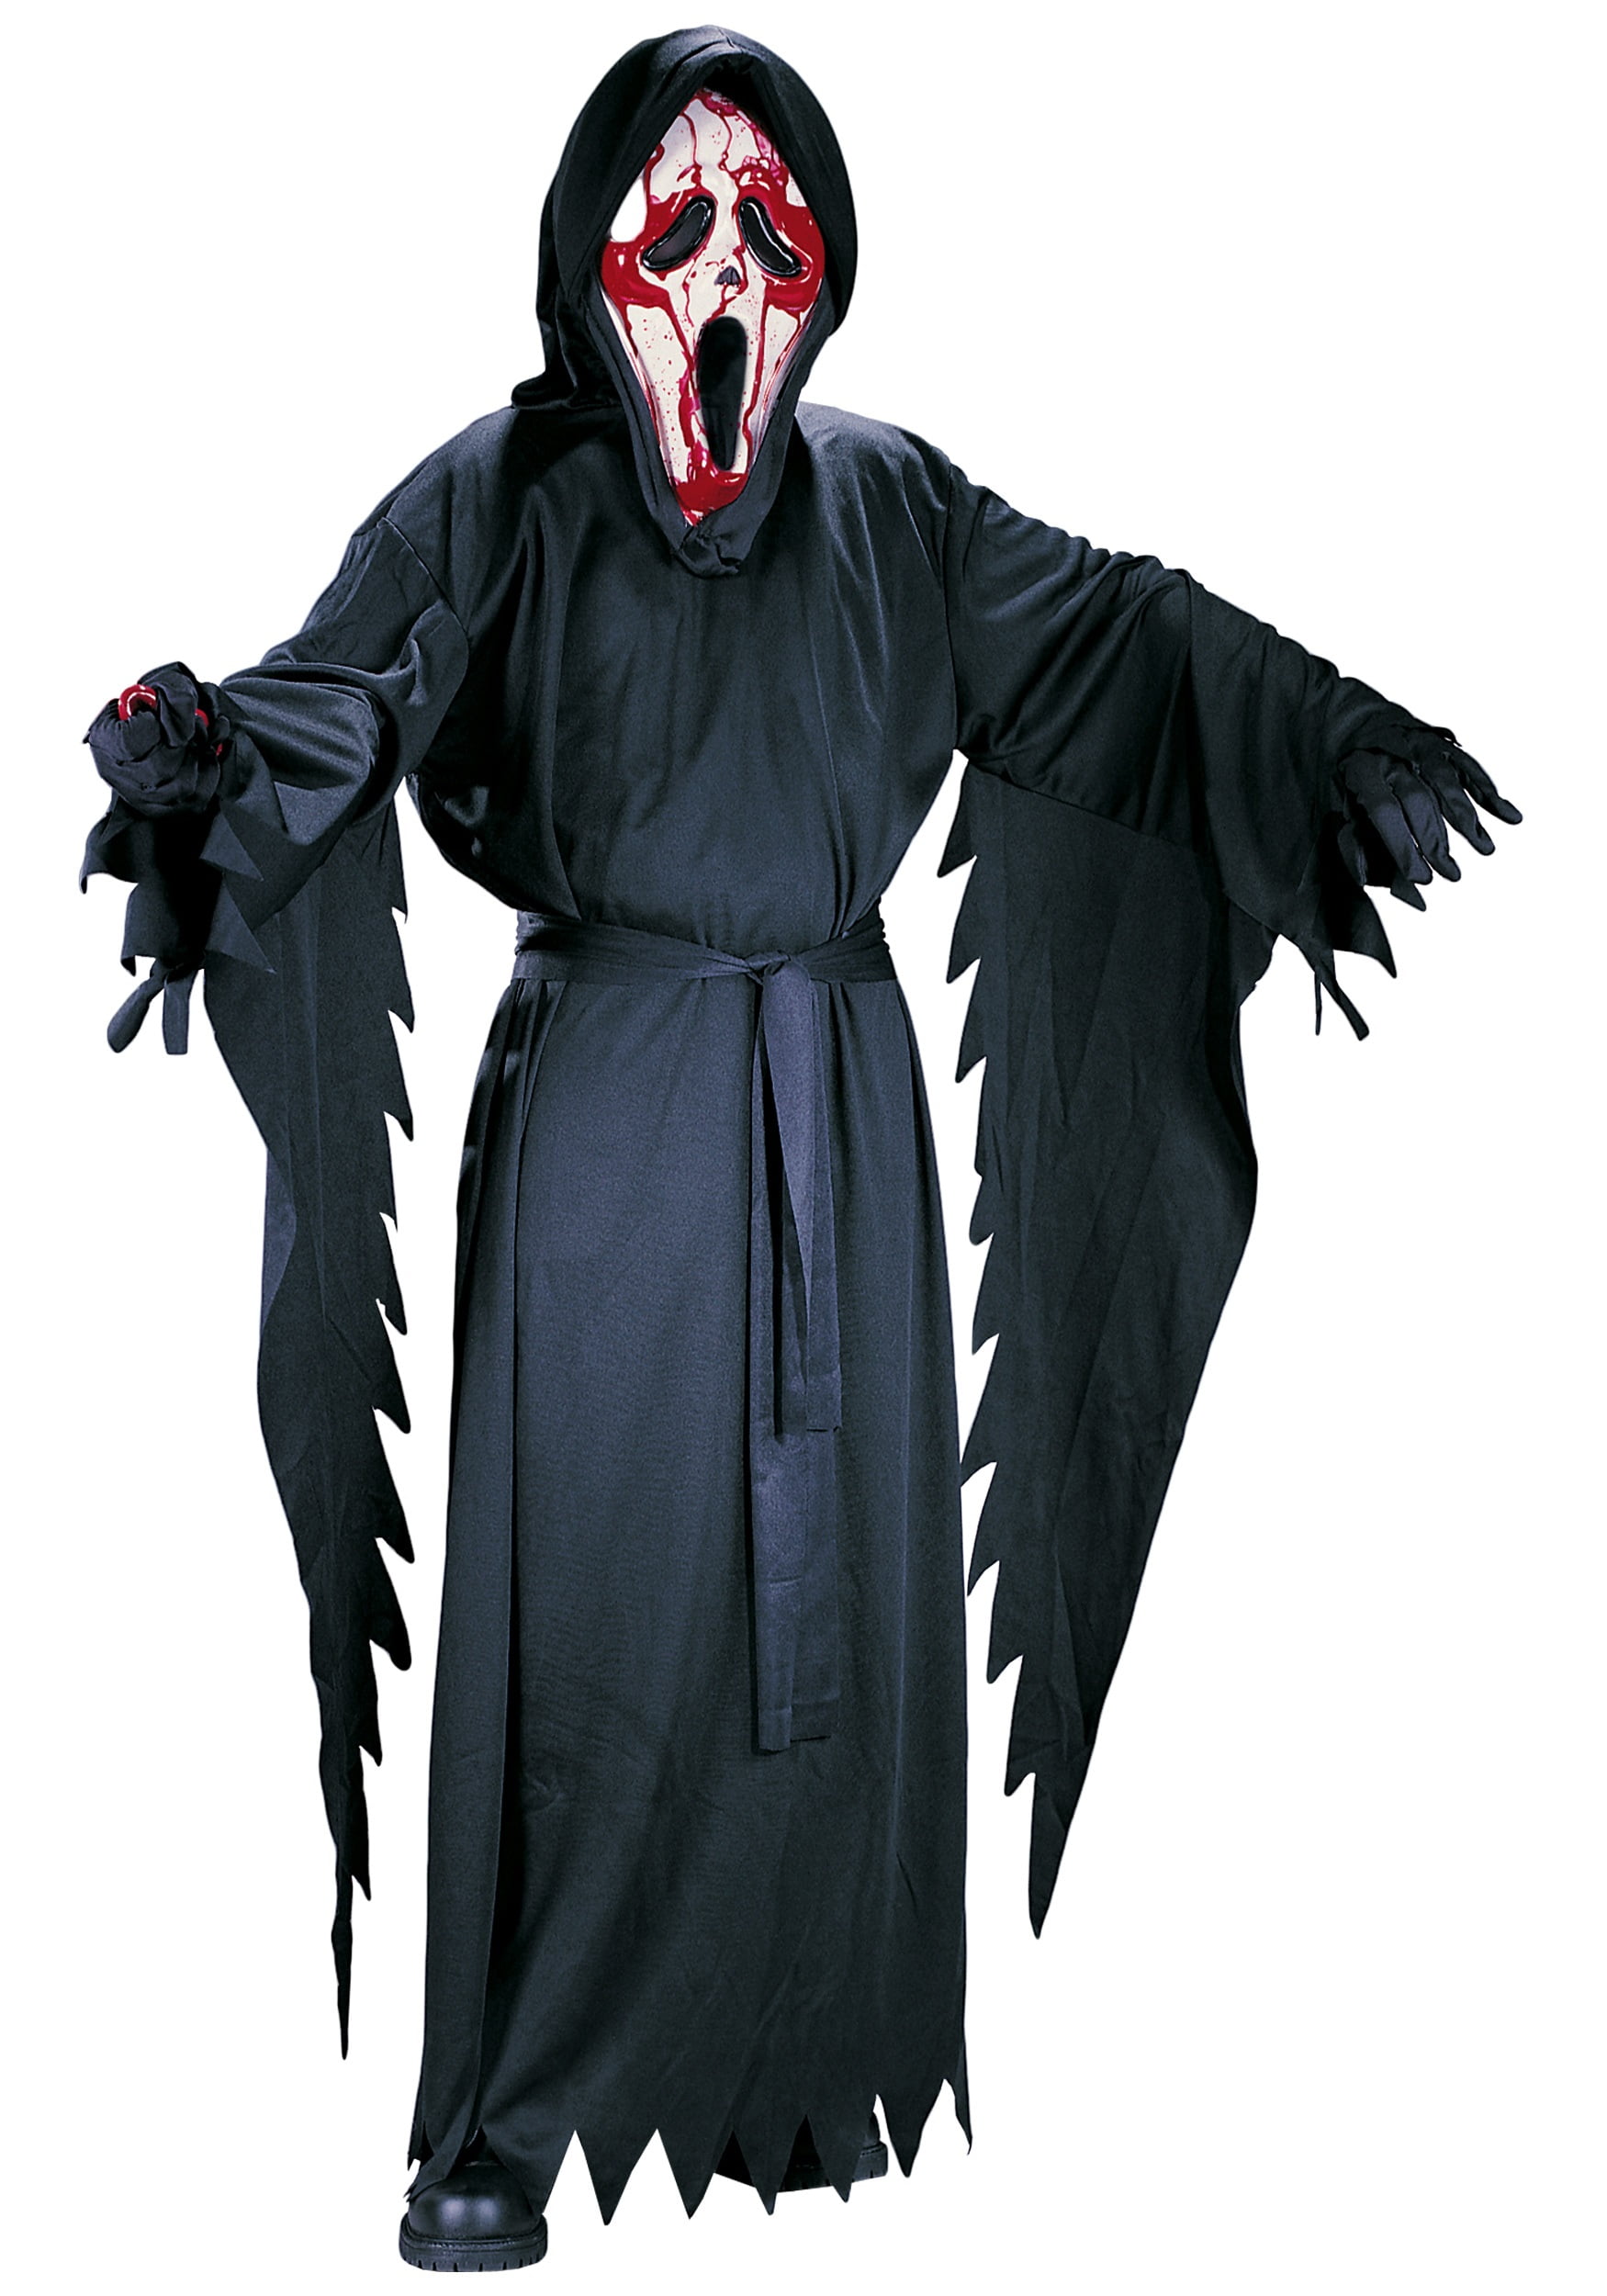 Scream Bleeding Ghost Face Halloween Costume for Boys, Small, with  Accessories 